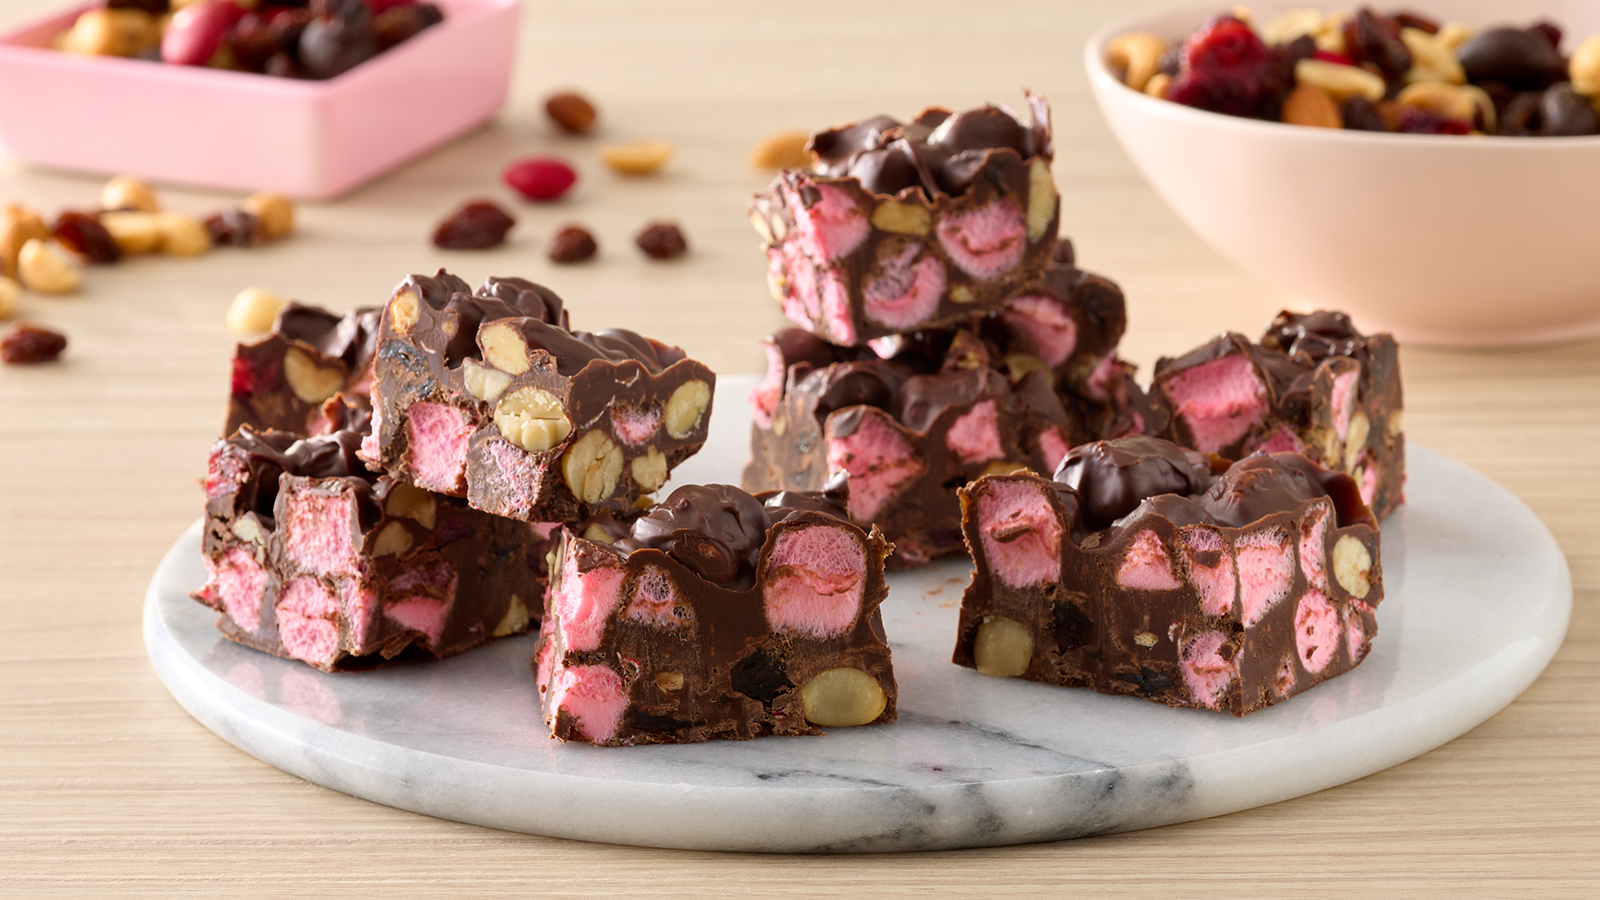 Indulge in the festive spirit with Holiday Nut Crunch Rocky Road, a delightful treat ready in just 30 minutes. Combining the velvety richness of chocolate and festive crunch of PLANTERS® Limited Edition Holiday Nut Crunch and marshmallows, result in bars that burst with holiday flavor and irresistible sweetness, making each bite a delightful celebration for your taste buds.